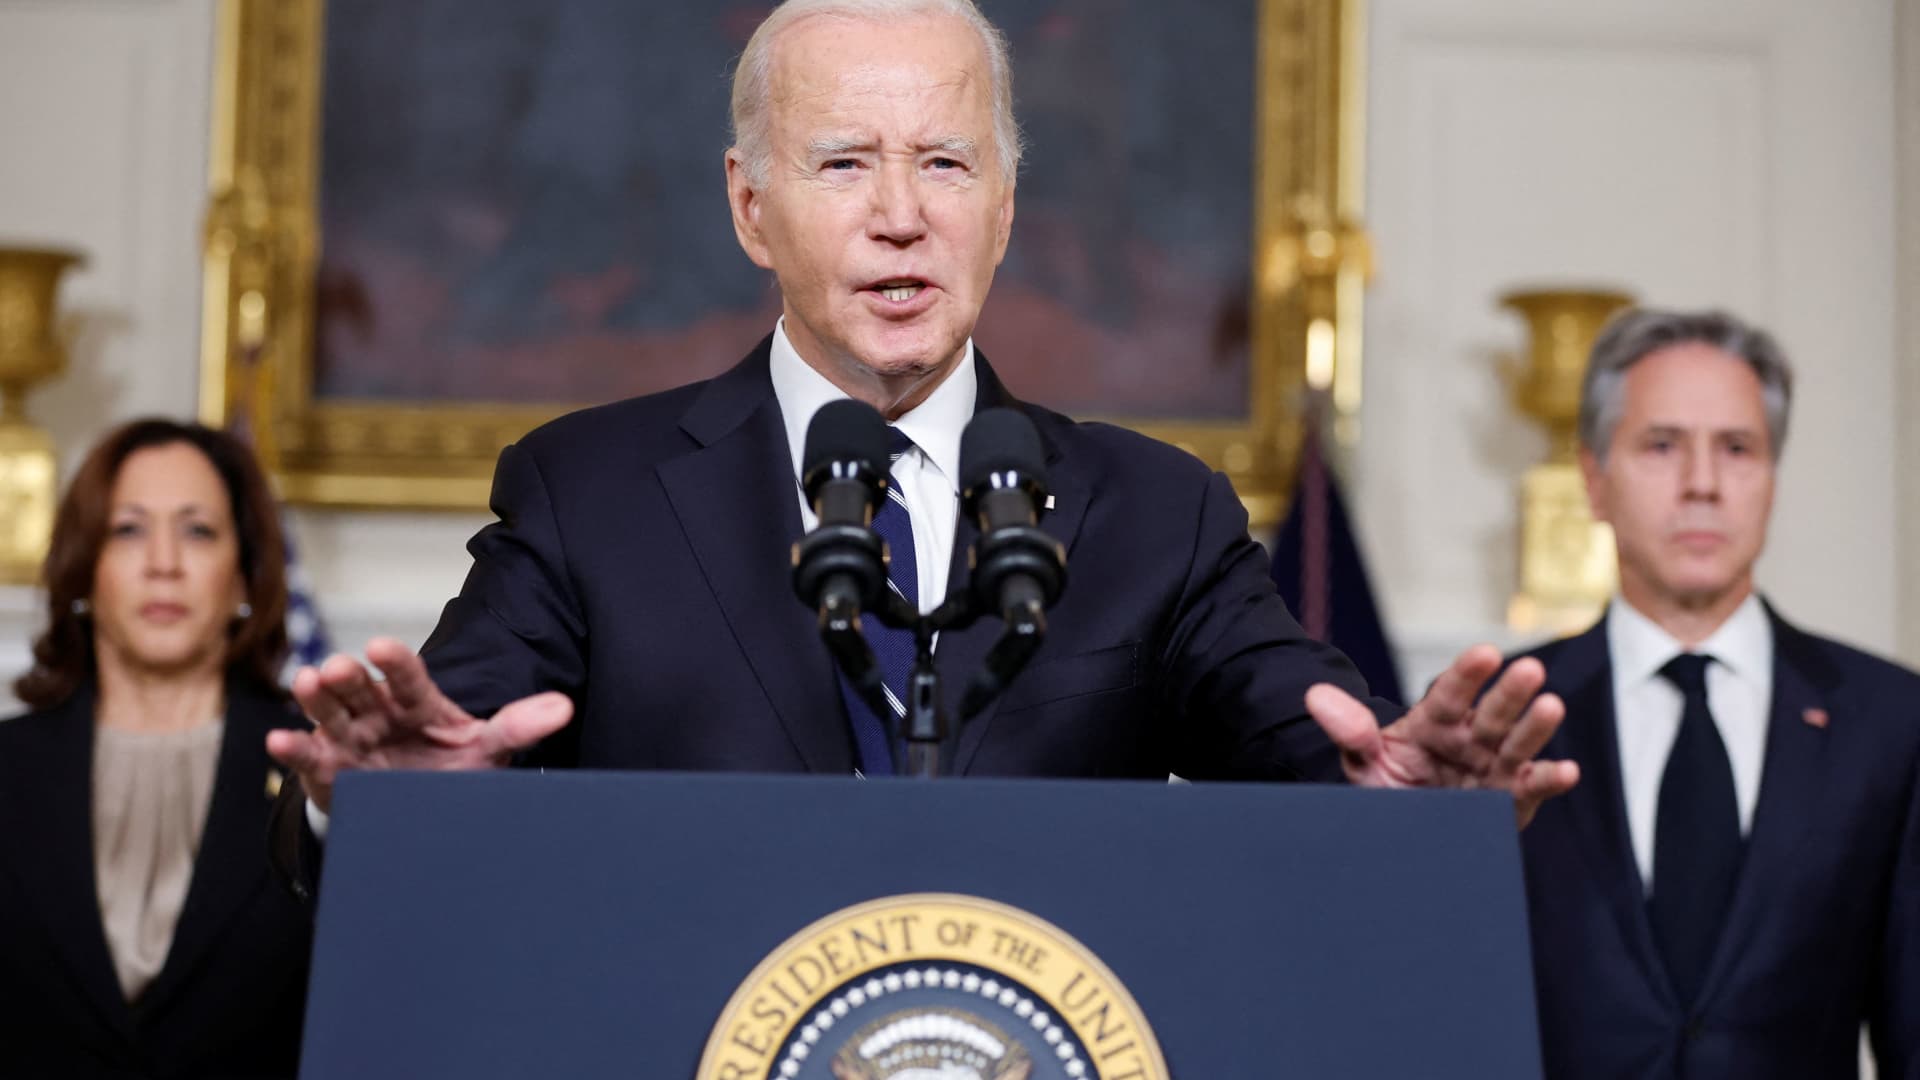 U.S. President Joe Biden, accompanied by Vice President Kamala Harris and U.S. Secretary of State Antony Blinken, makes remarks after speaking by phone with Israeli Prime Minister Benjamin Netanyahu about the situation in Israel following Hamas' deadly attacks, from the State Dining Room at the White House in Washington, October 10, 2023.